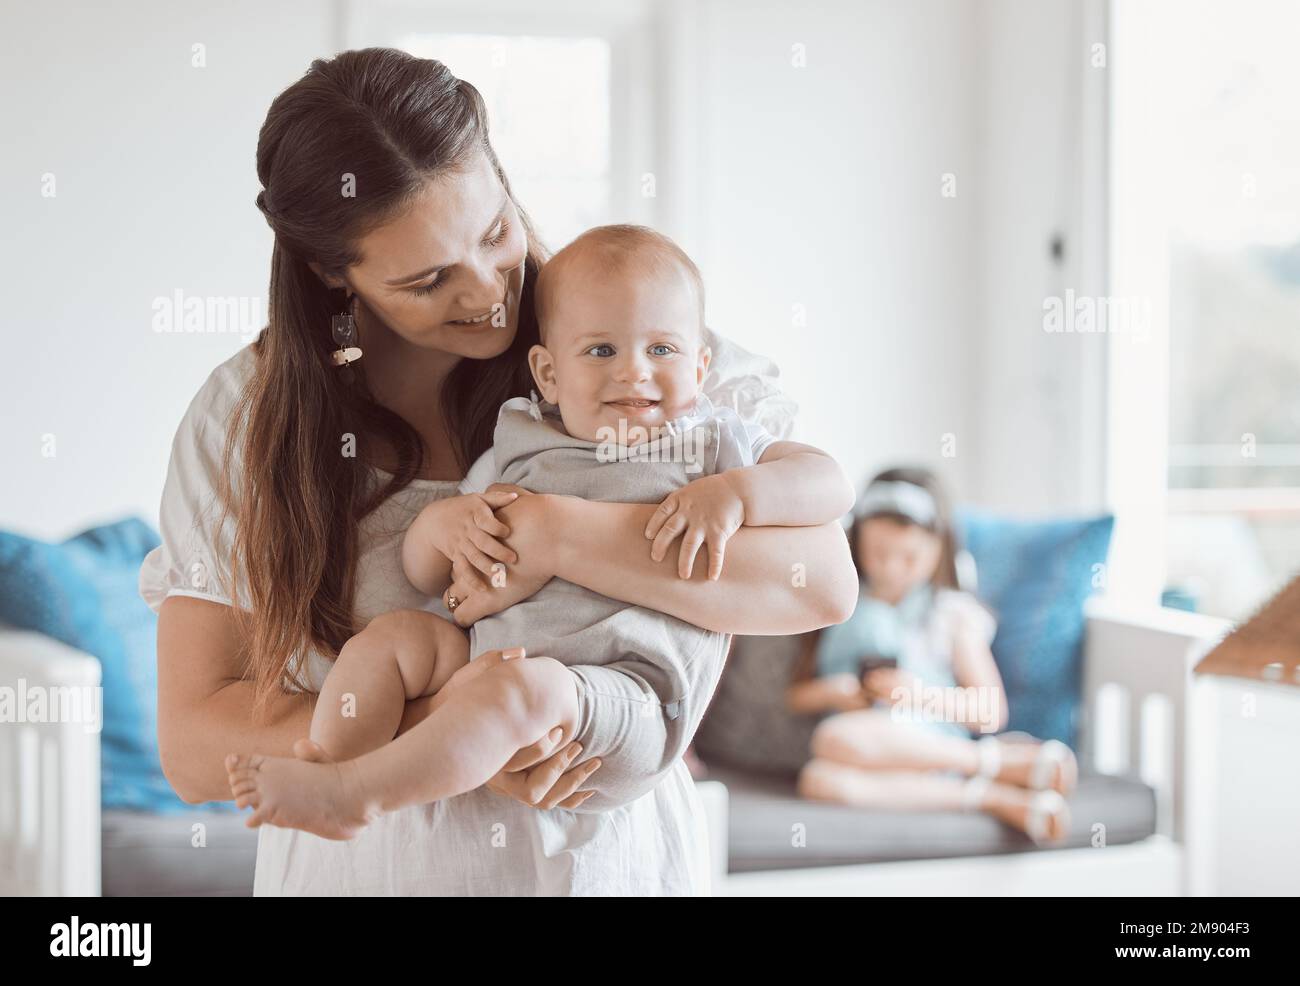 My perfect little boy. a beautiful young mother bonding with her newborn at home. Stock Photo